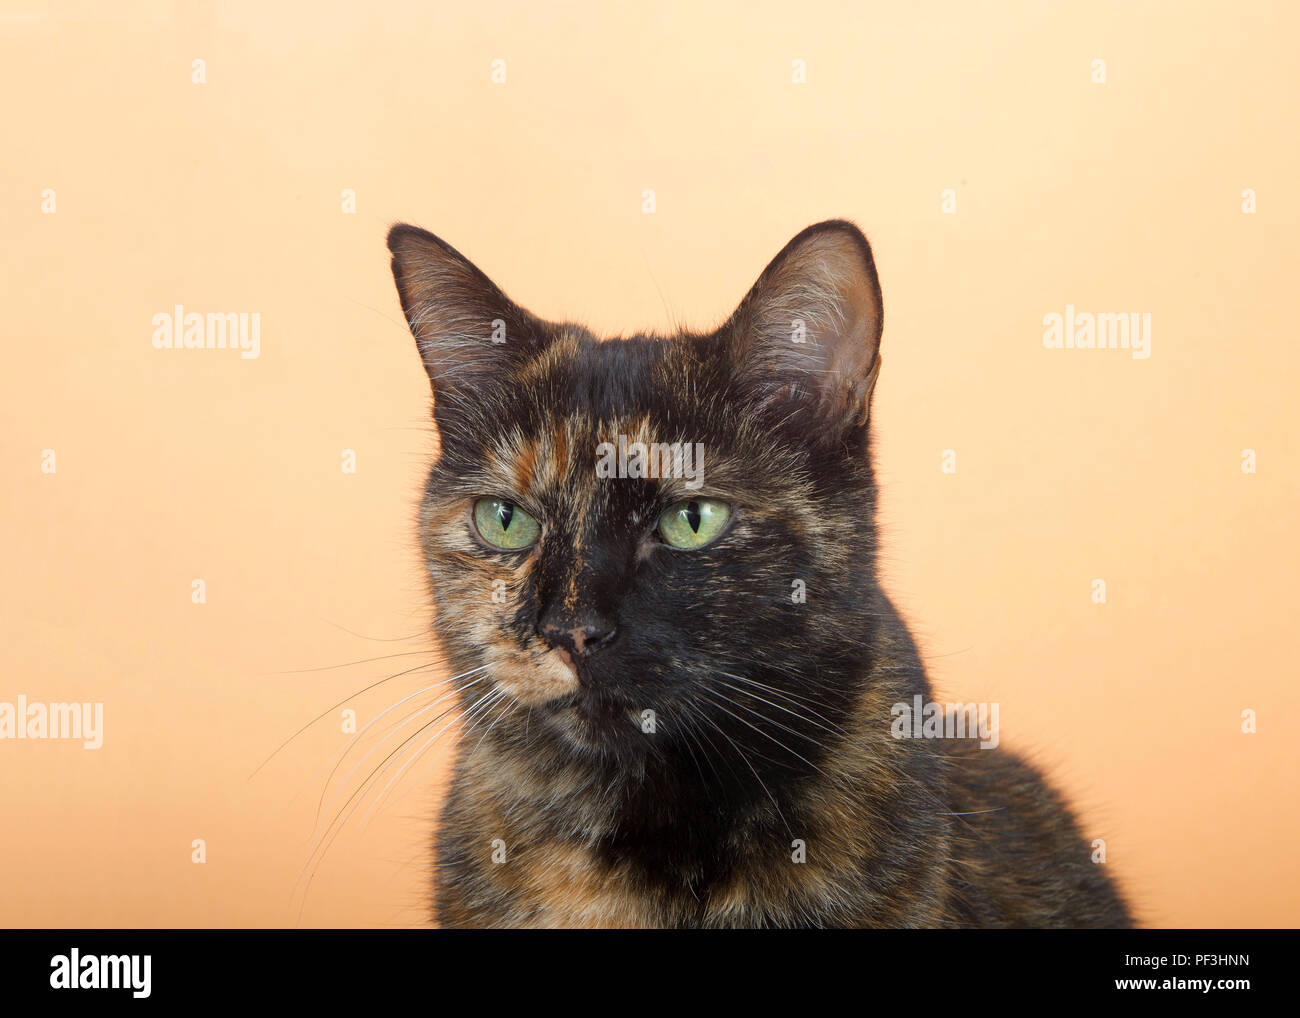 Portrait of one tortie torbie tabby cat on an orange background. Looking directly to viewers left with a curious attentive expression. Copy space. Stock Photo